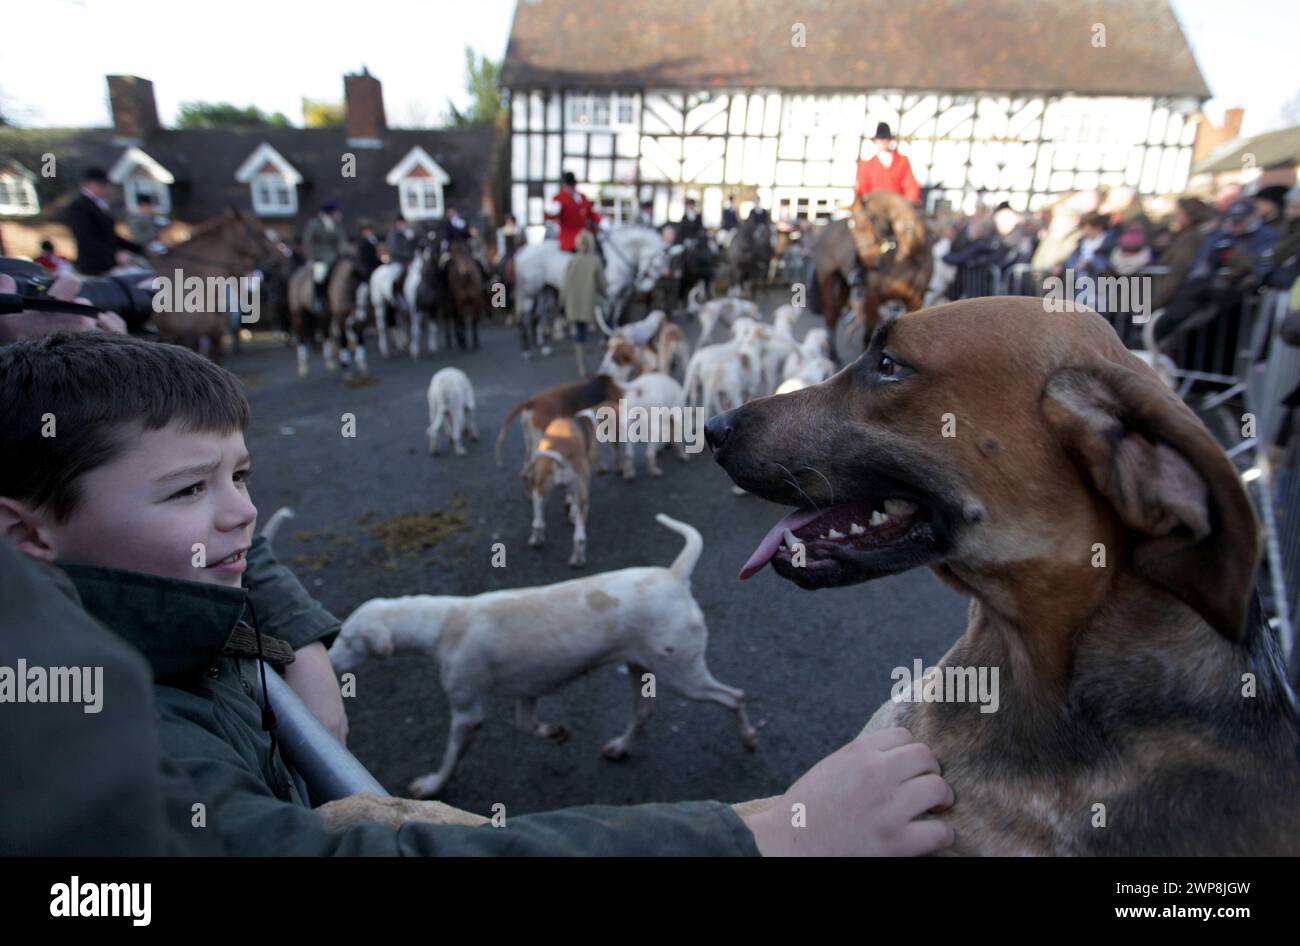 26/12/12   The Meynell and South Staffordshire Hunt gather for their Boxing Day hunt in Abbots Bromley, Staffordshire. All Rights Reserved - F Stop Pr Stock Photo